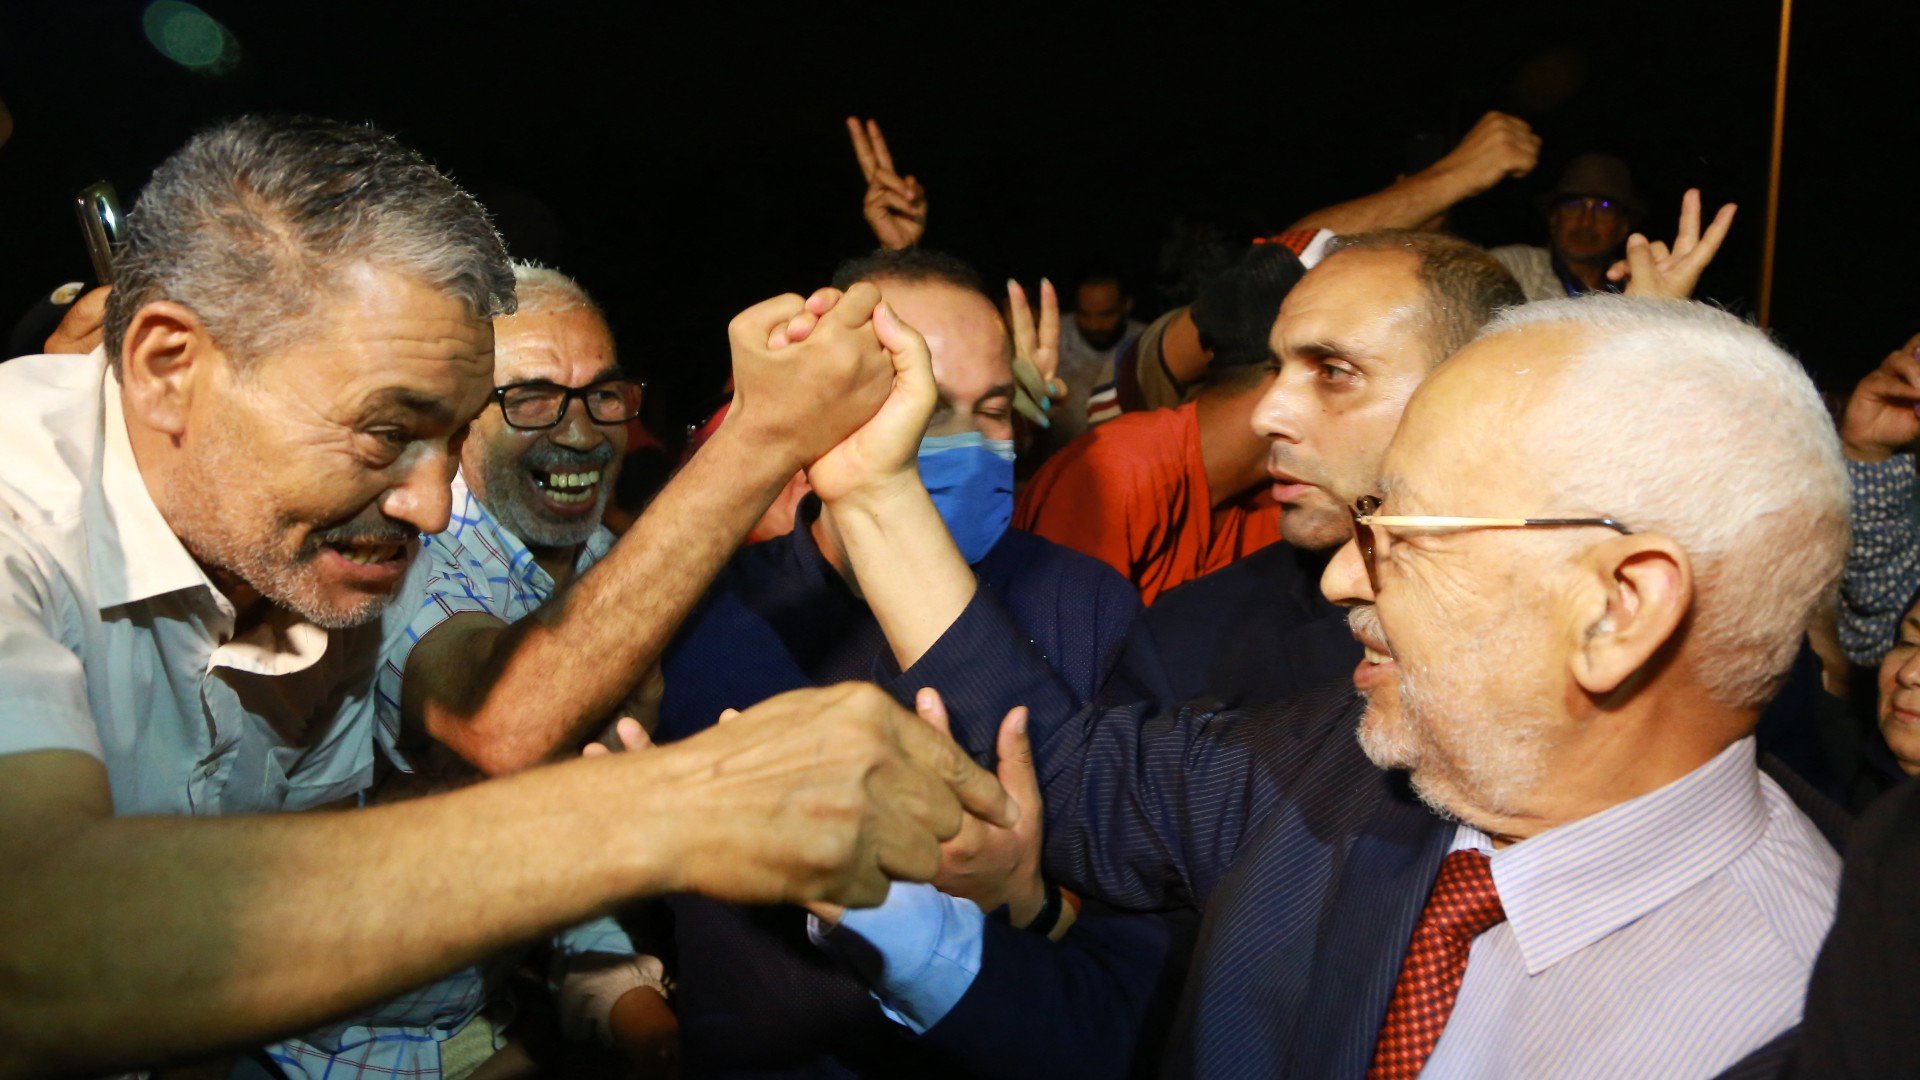 Rached Ghannouchi, head of Tunisia's Islamist Ennahda party, greets his supporters as he leaves the office of Tunisia's counter-terrorism prosecutor in Tunis on July 19, 2022.